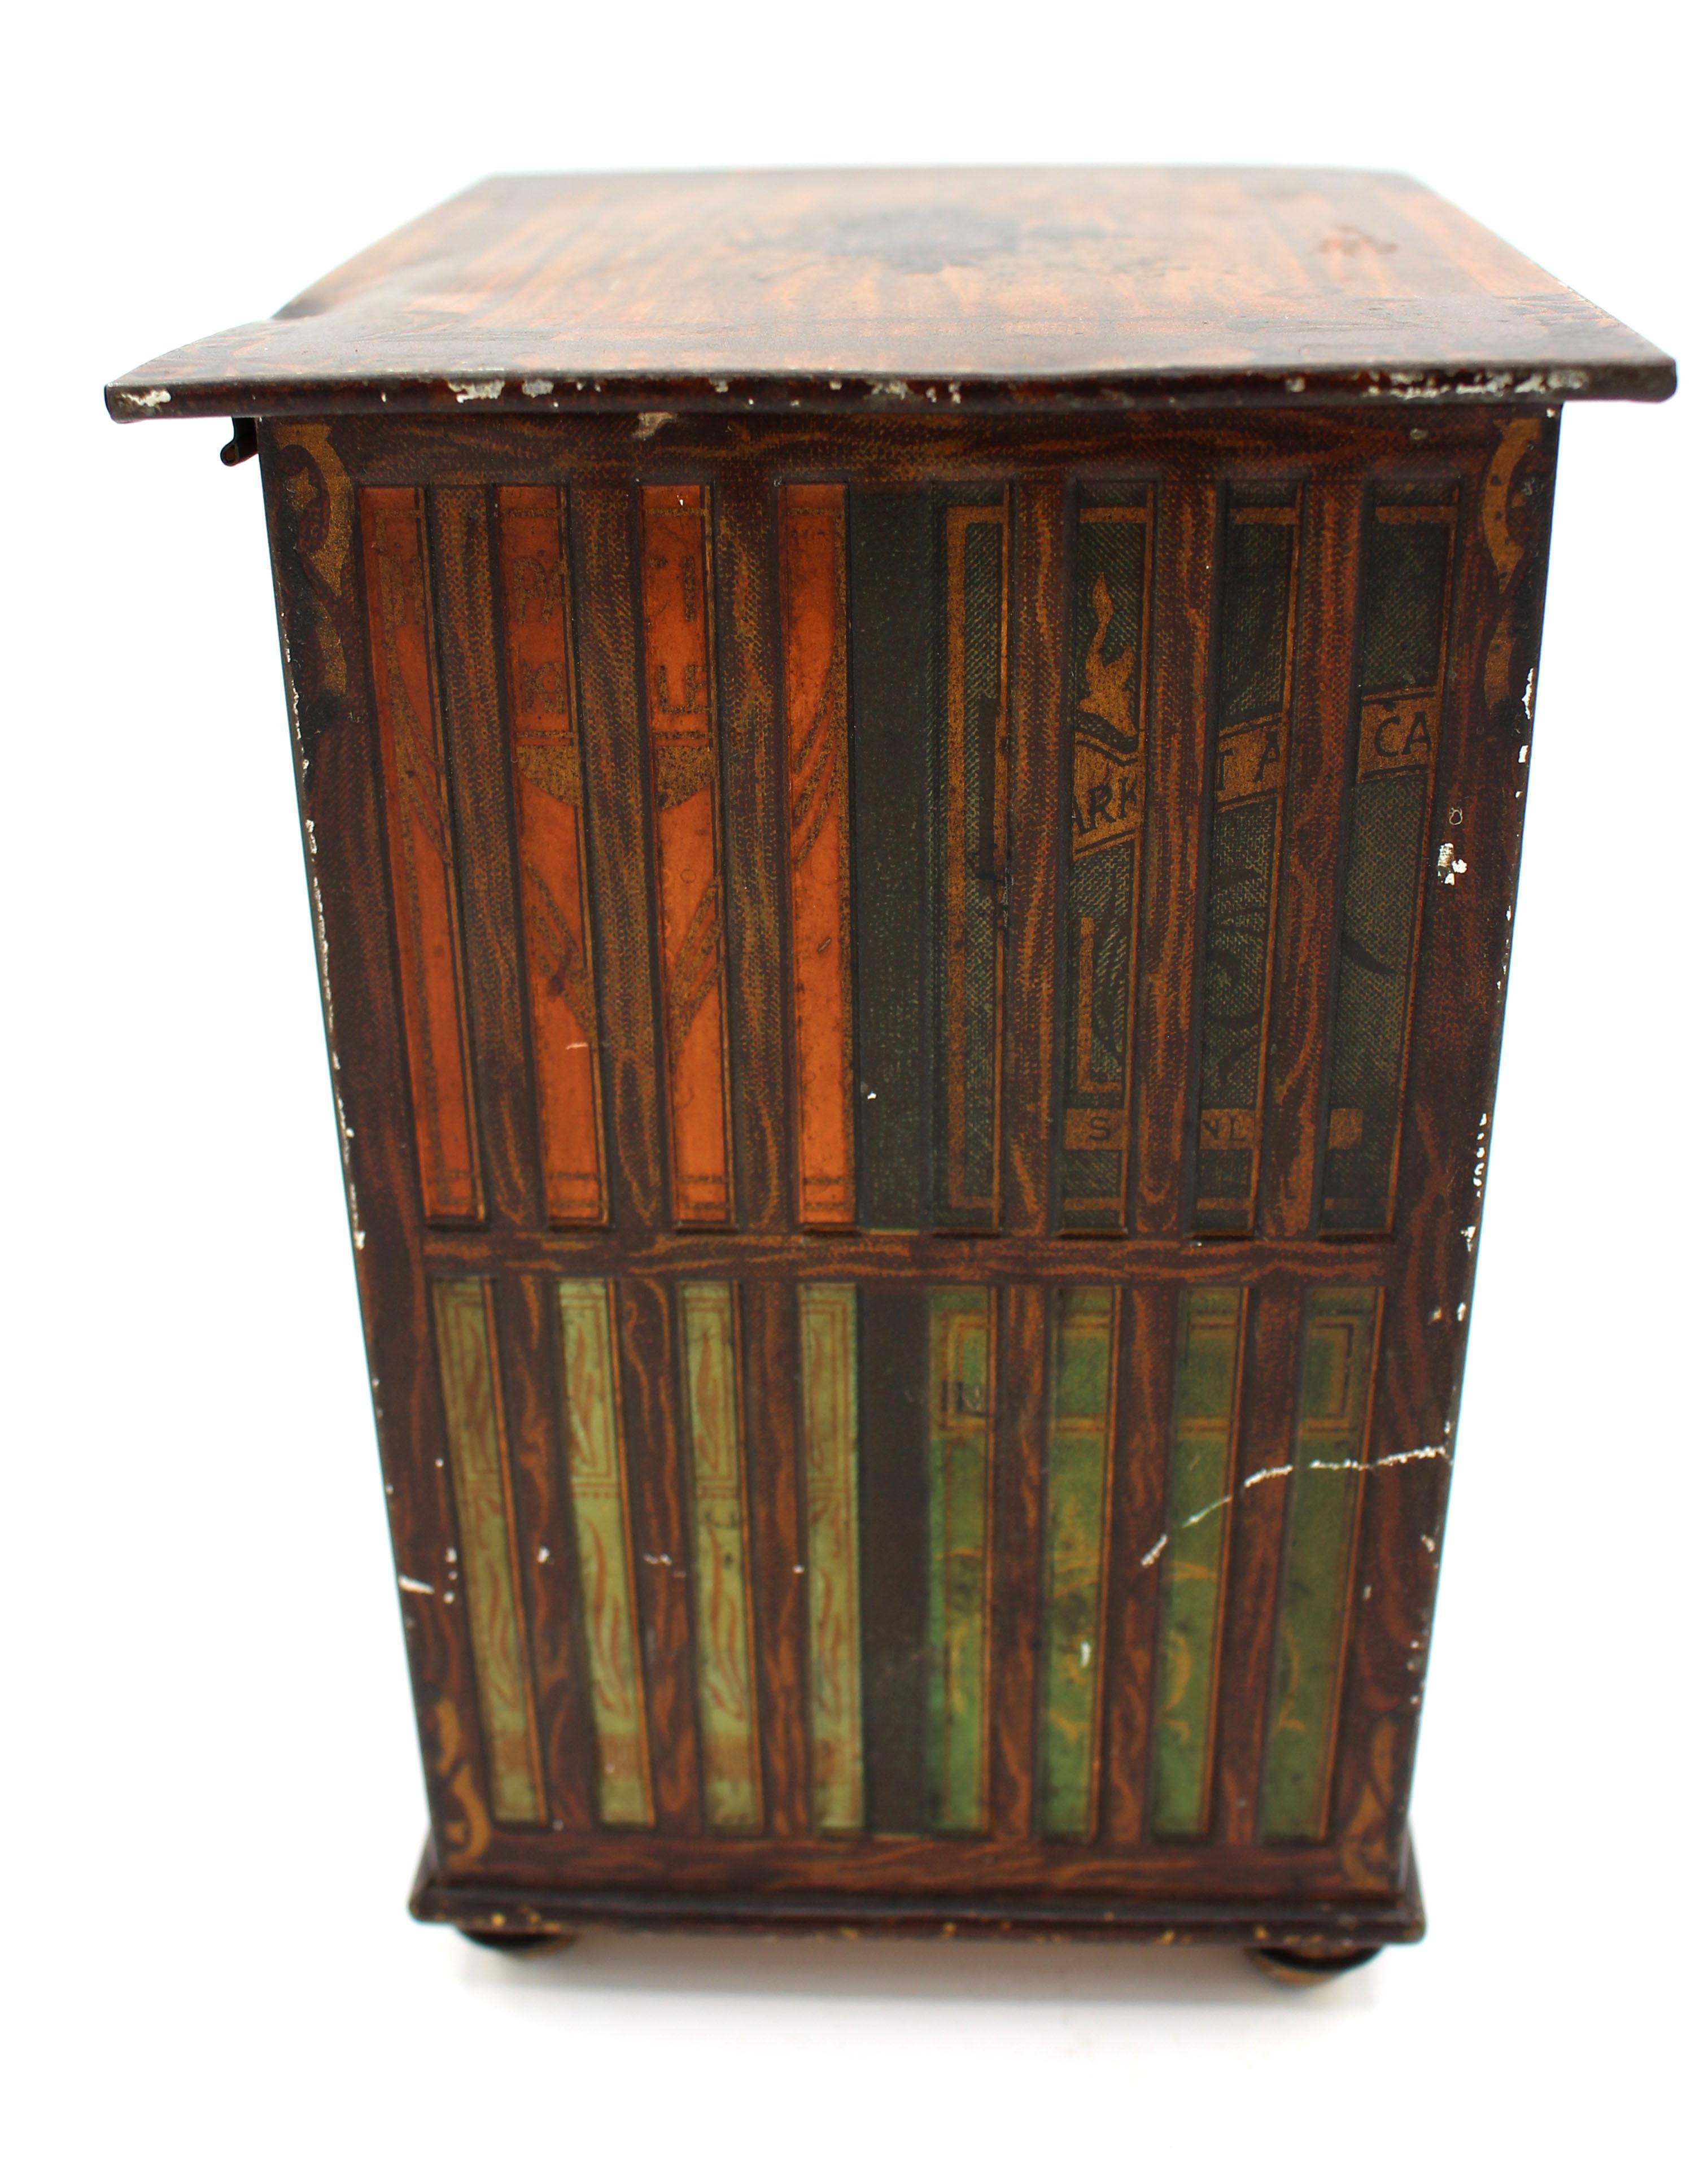 Edwardian Faux Revolving Bookcase Biscuit Tin Box by Huntley & Palmers, 1905, English For Sale